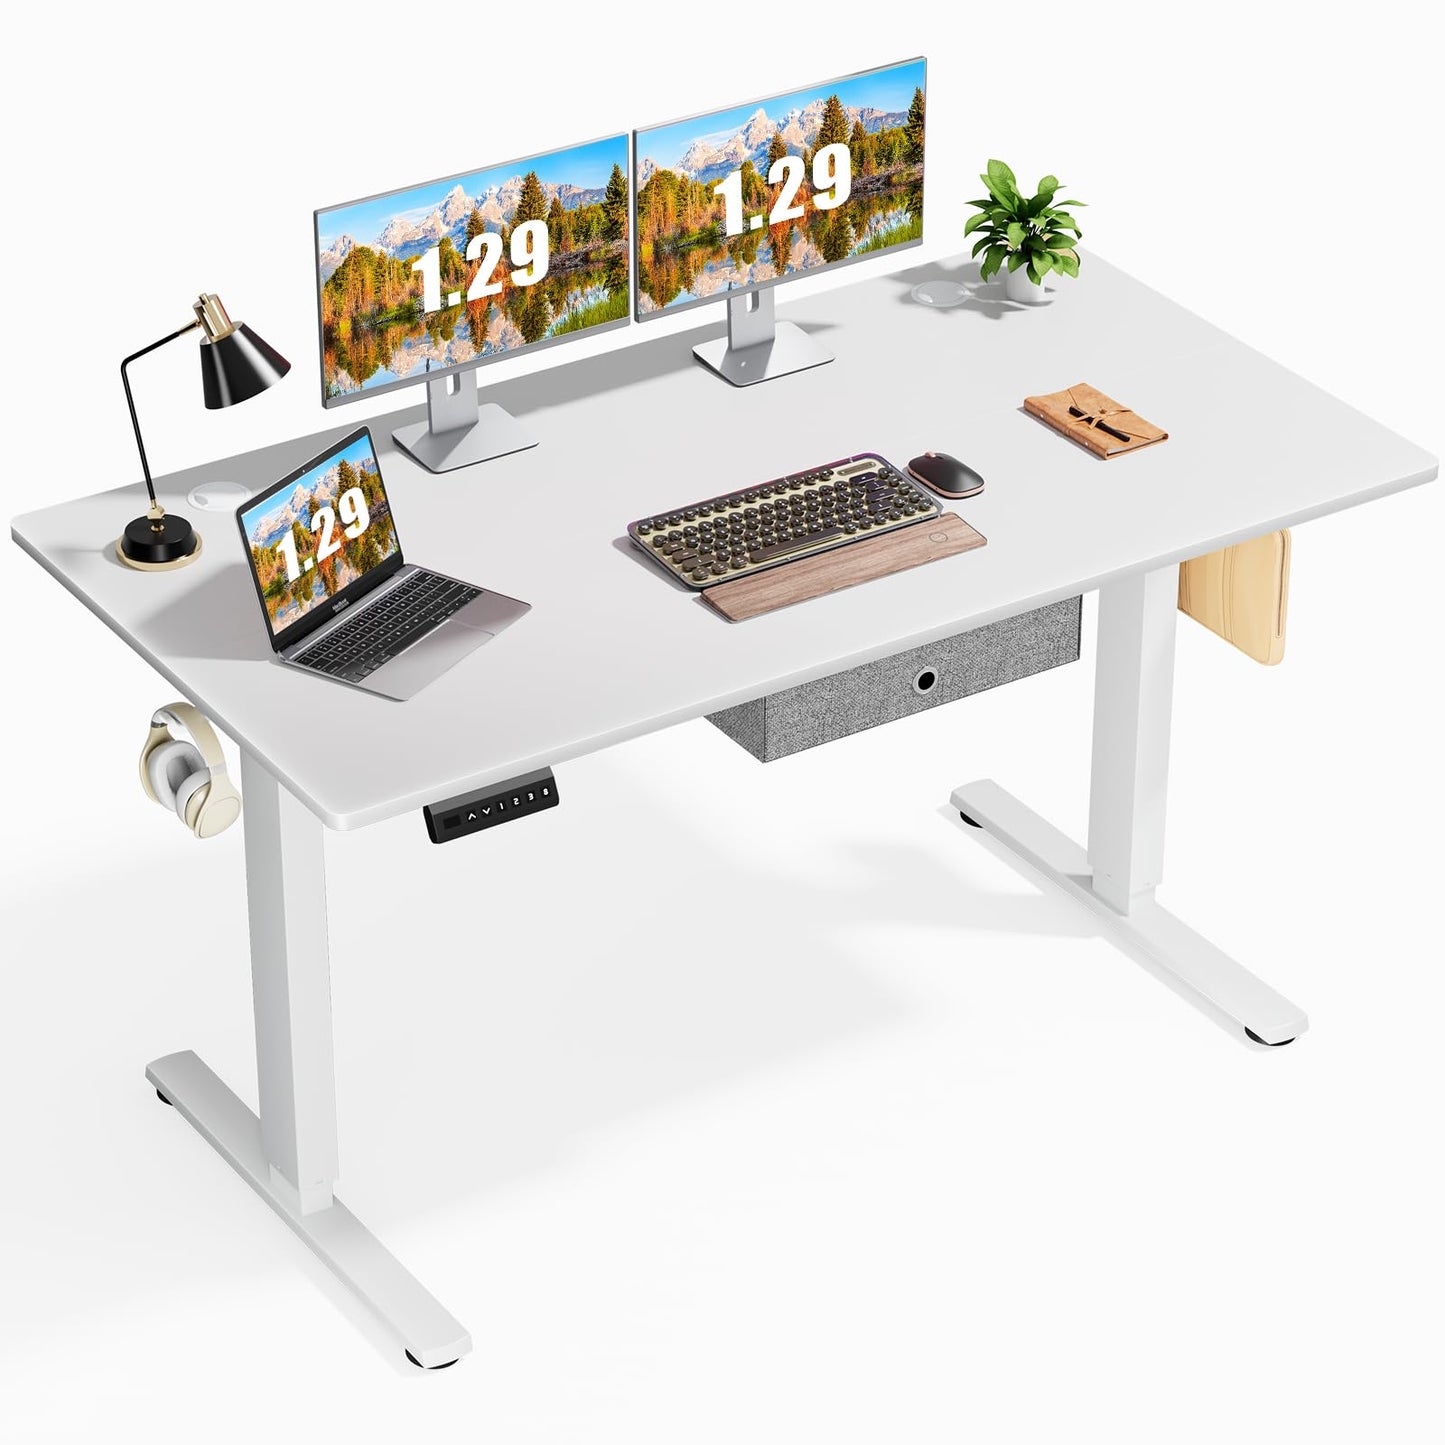 Sweetcrispy Electric Standing Desk Adjustable Height, 55 x 24 inch Sit Stand Up Desk with Drawer, Ergonomic Home Office Table Computer Workstation